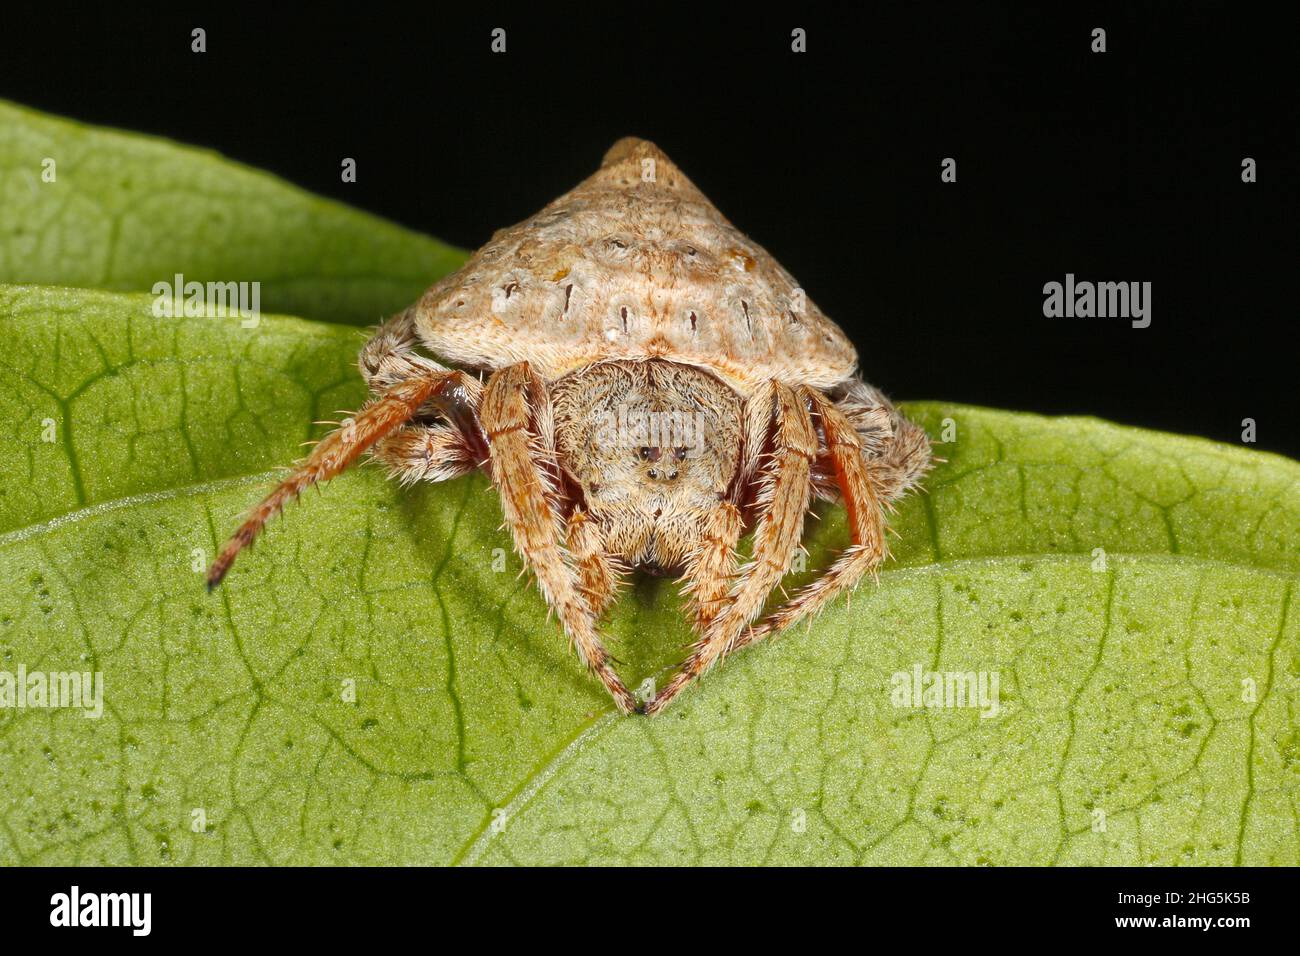 Wrap Around Spider, Dolophones sp. This is a genus of the orb-weaver spiders. Coffs Harbour, NSW, Australia Stock Photo